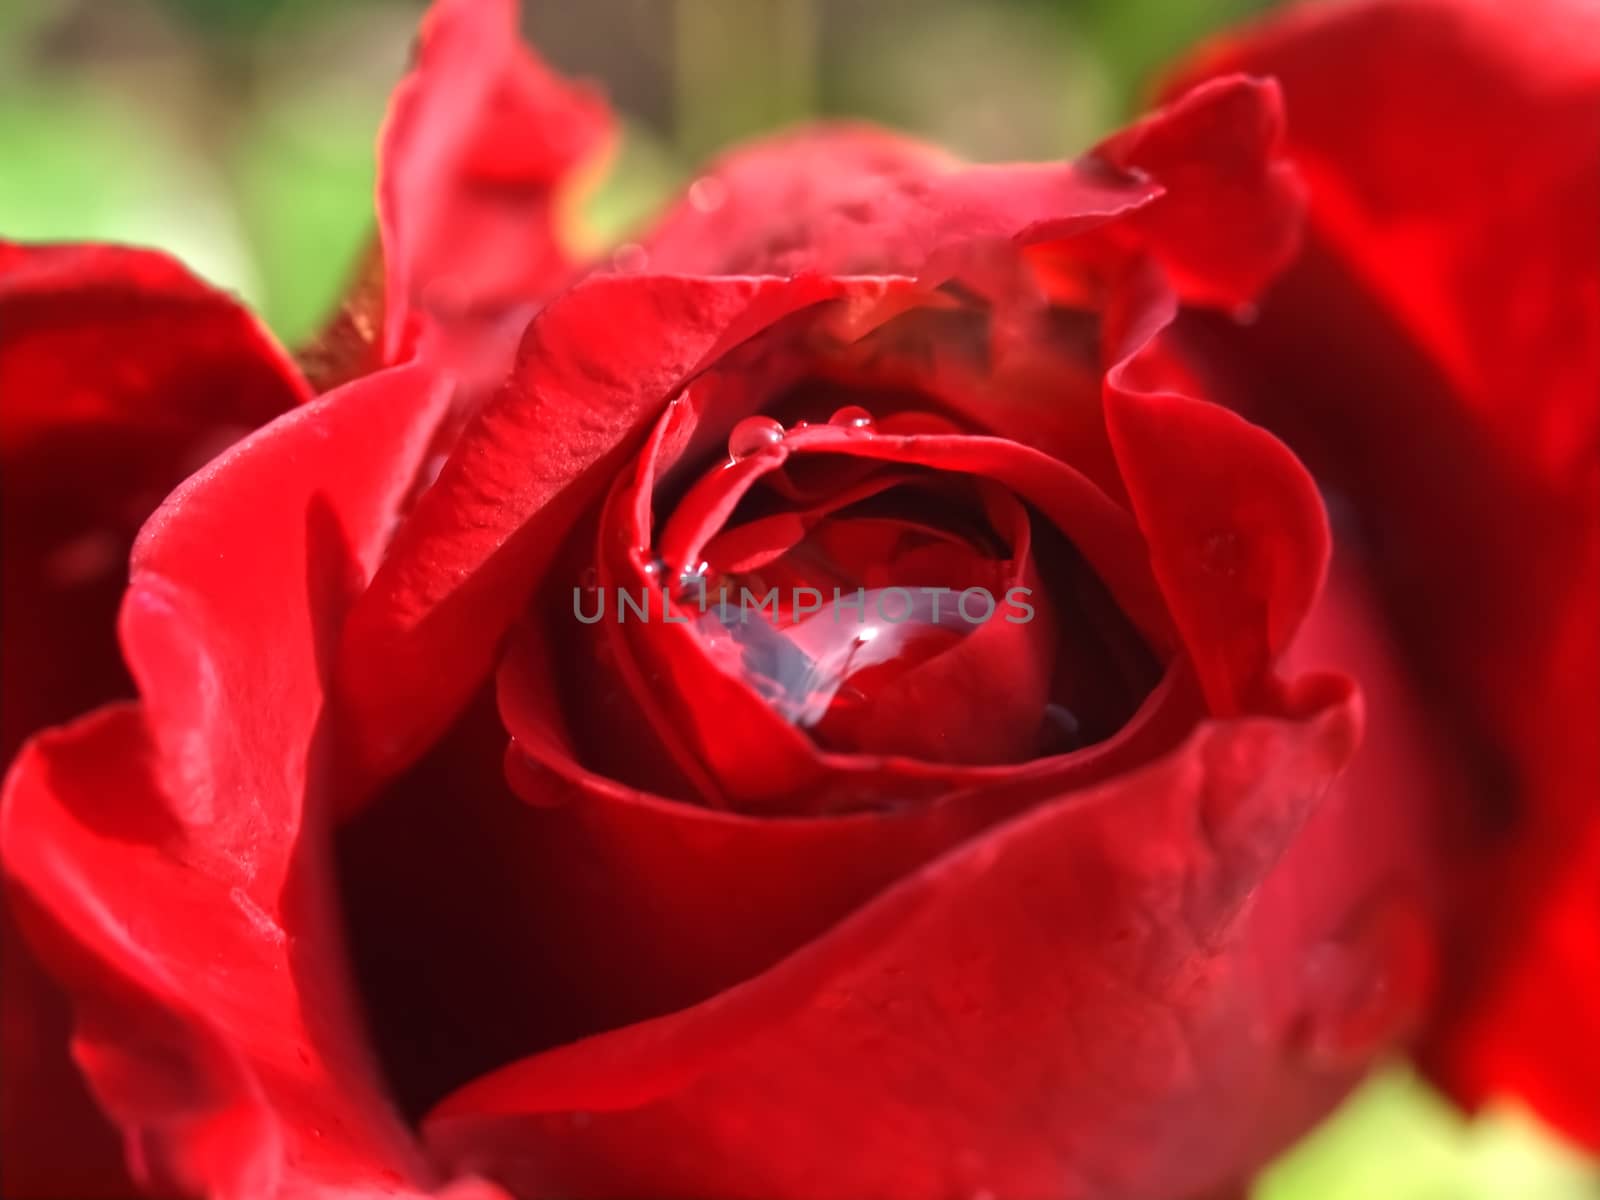 In love with red roses by Stimmungsbilder